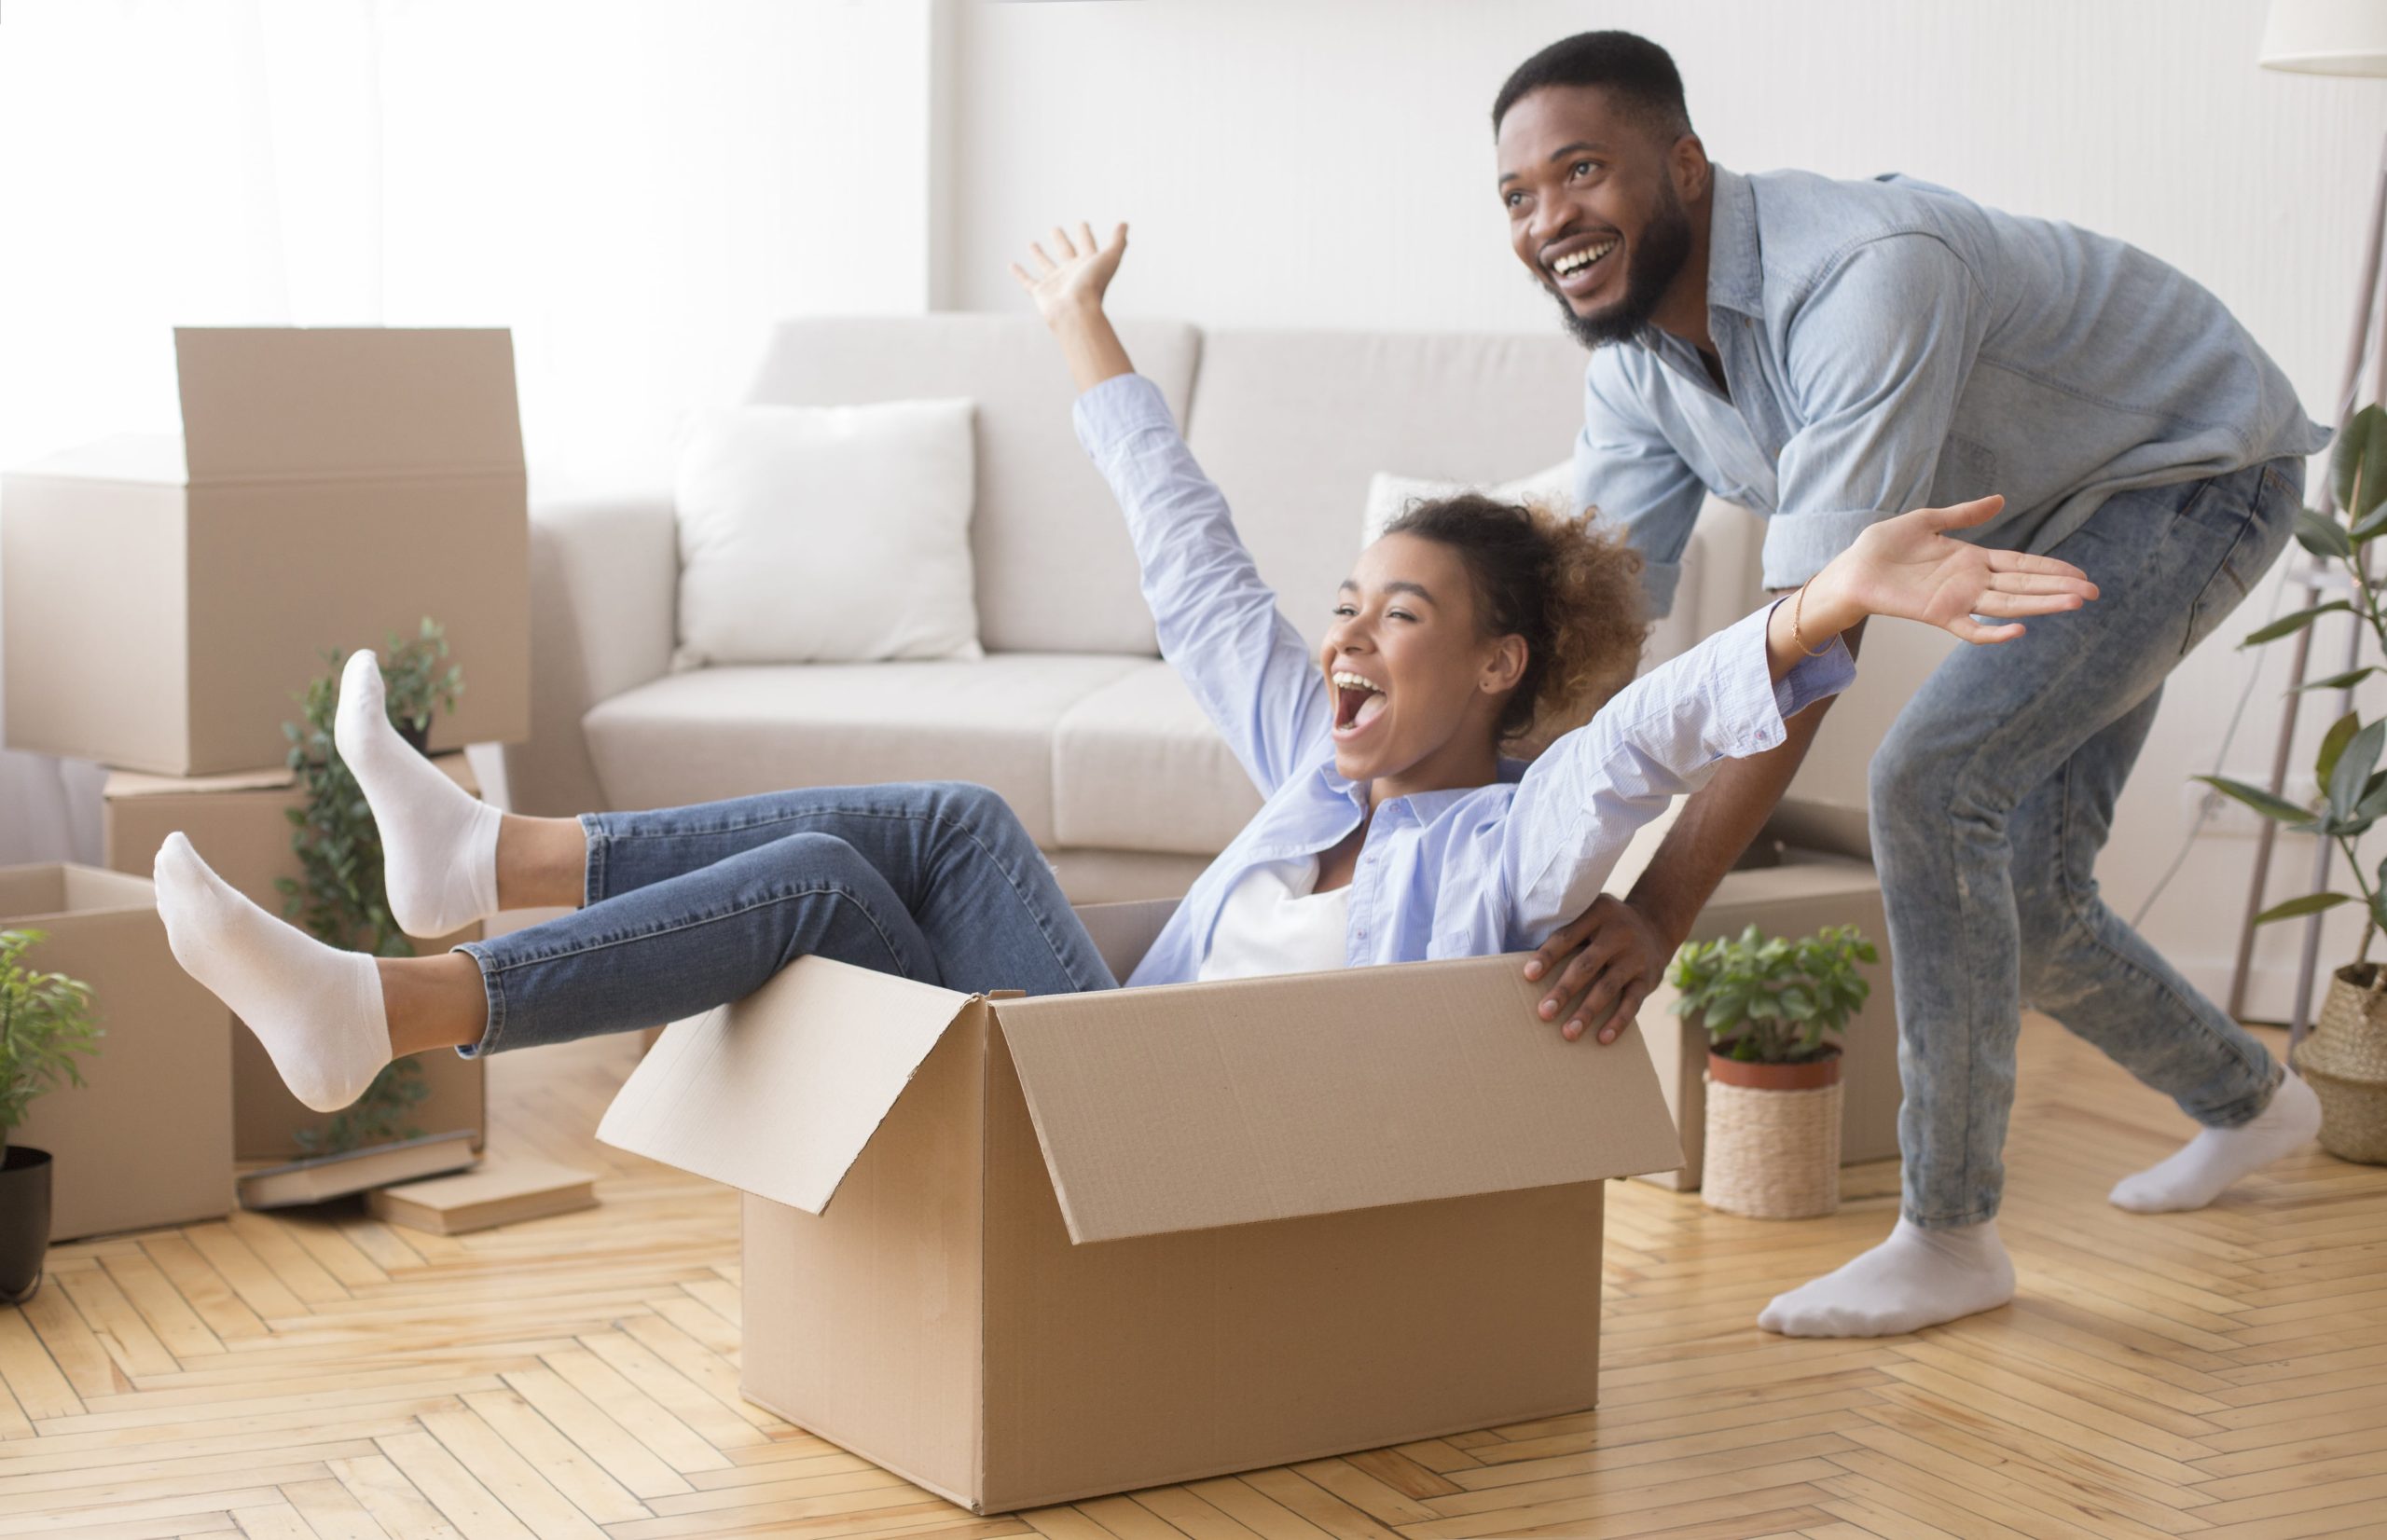 Excited African American Man Pushing Woman Riding In Cardboard Box Celebrating Moving Into New House